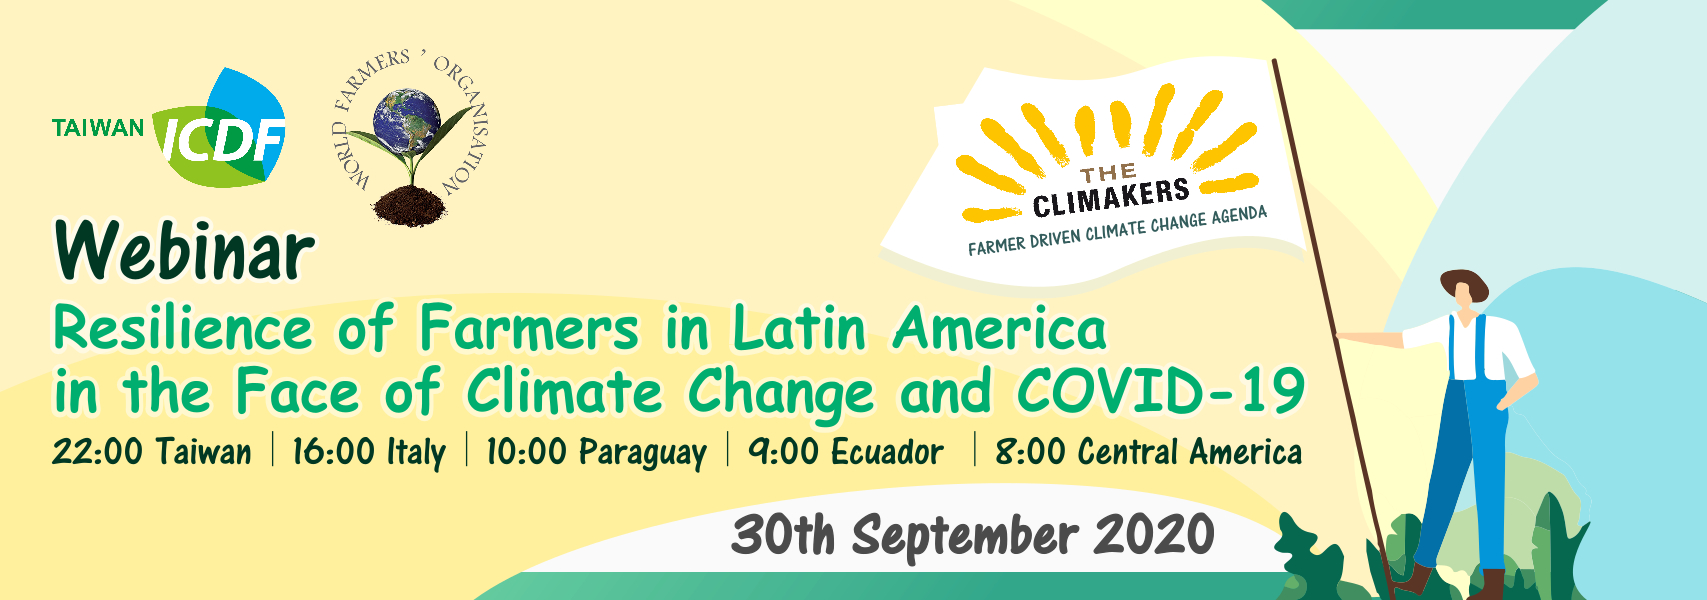 Resilience of Farmers in Latin America in the Face of Climate Change and COVID-19